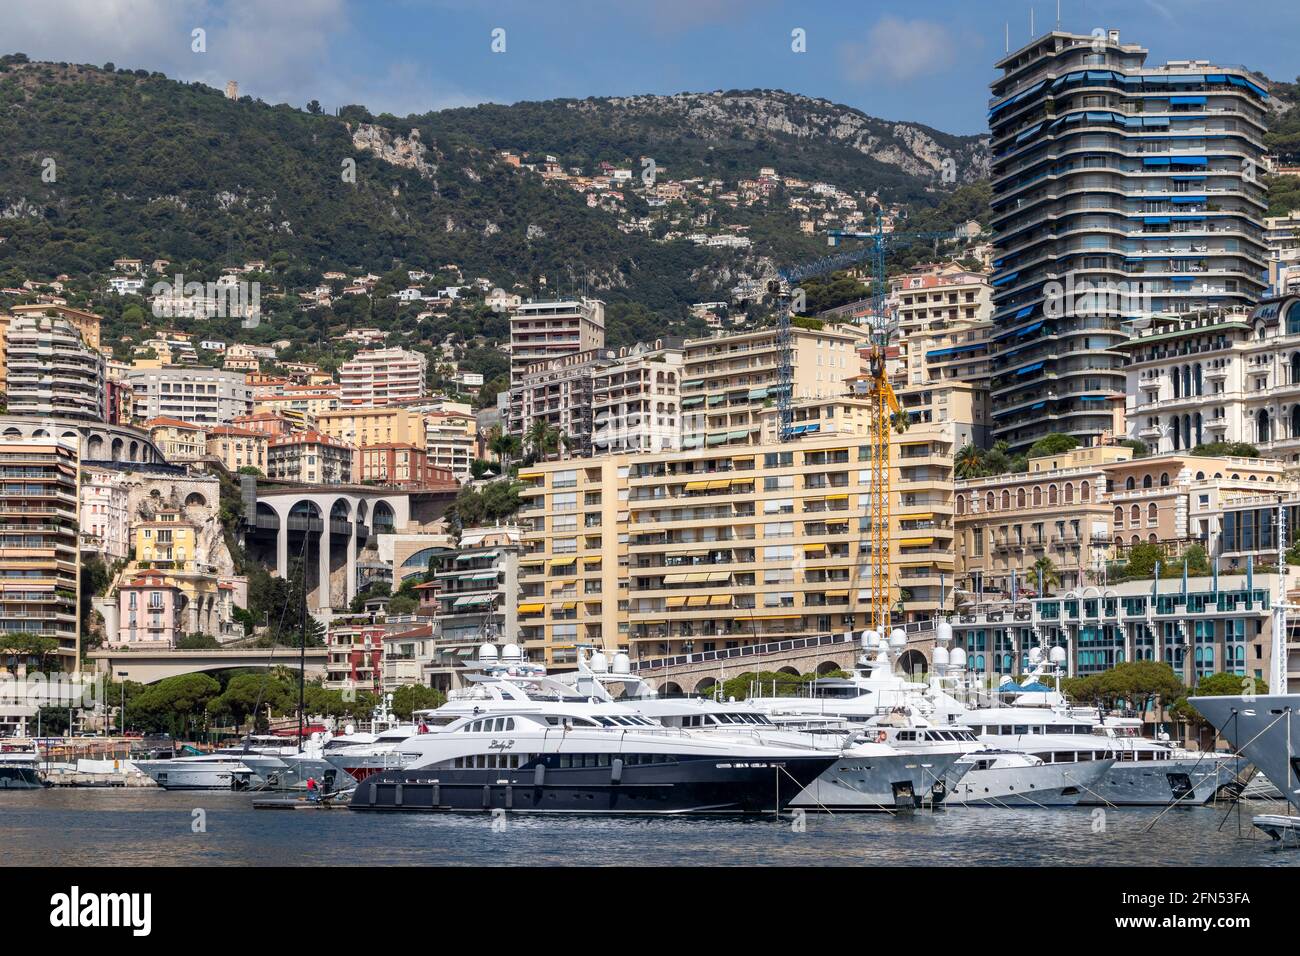 Hillsides and buildings bordering the yacht and boat marina at Monte Carlo, Monaco on the French Riviera. Stock Photo